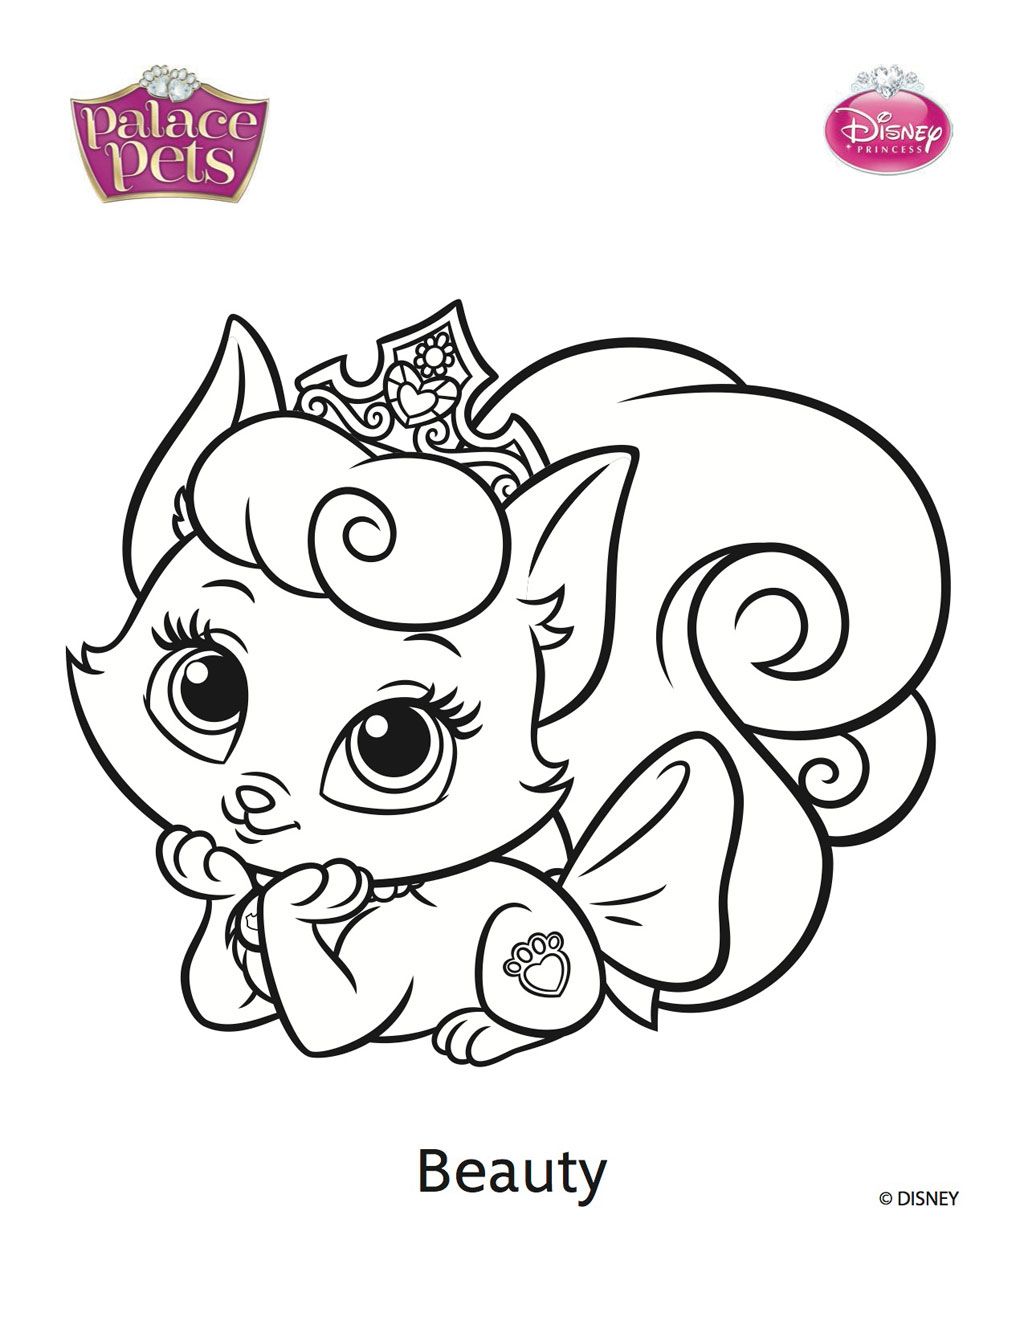 palace pets beauty coloring pages